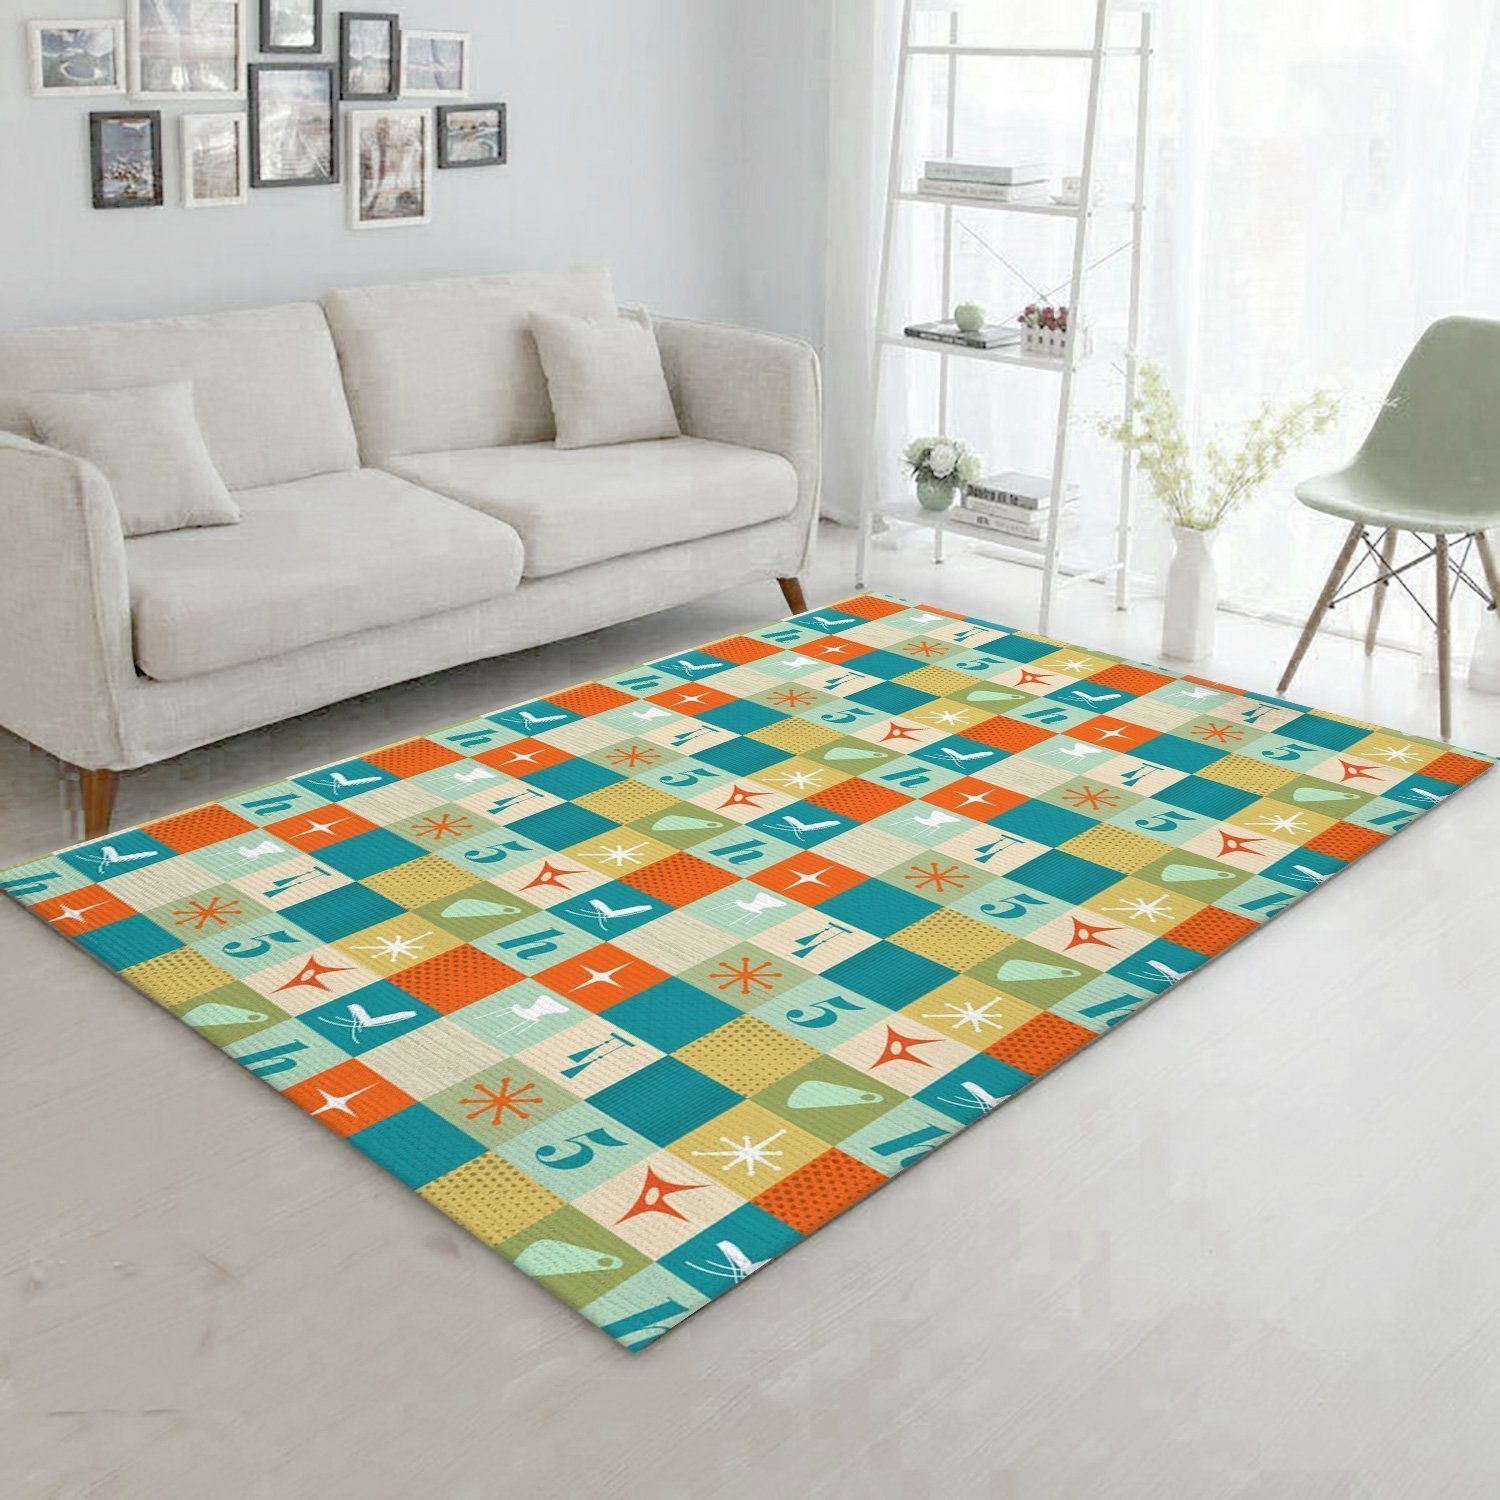 Midcentury Pattern 81 Area Rug For Christmas, Living Room Rug, Christmas Gift US Decor - Indoor Outdoor Rugs